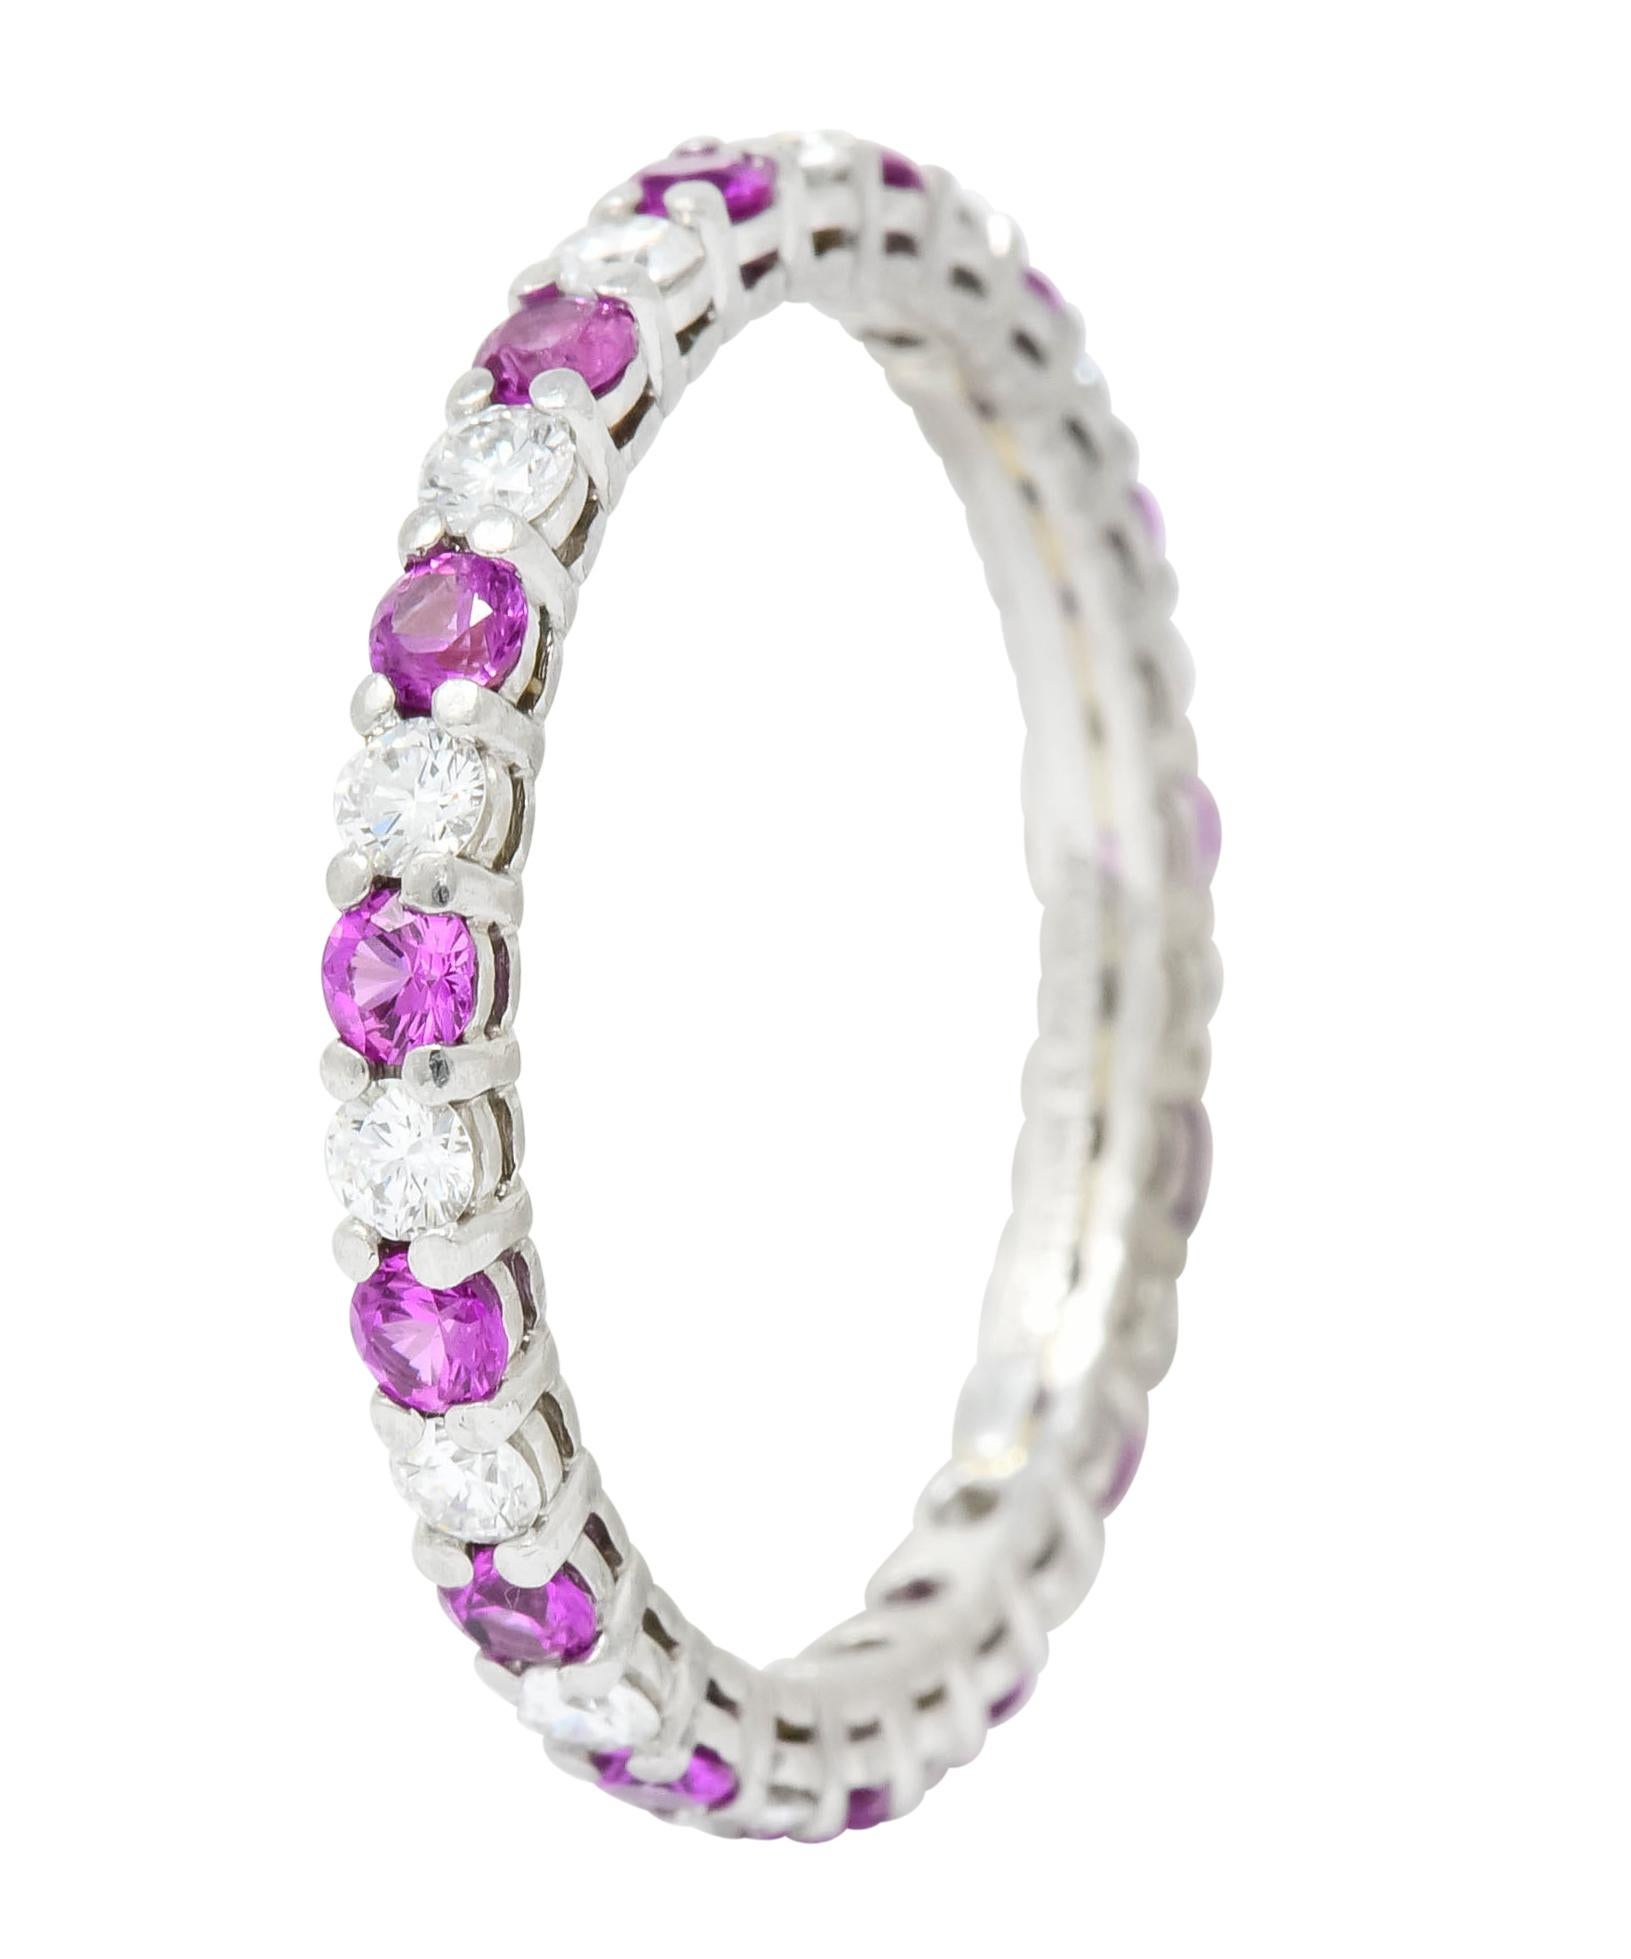 Eternity style band set with shared prongs alternating with 0.45 carat of round brilliant cut diamonds and 0.60 carat of round cut pink sapphires

Diamonds are eye-clean and white; sapphires are a bubble gum pink

Fully signed Tiffany & Co. and